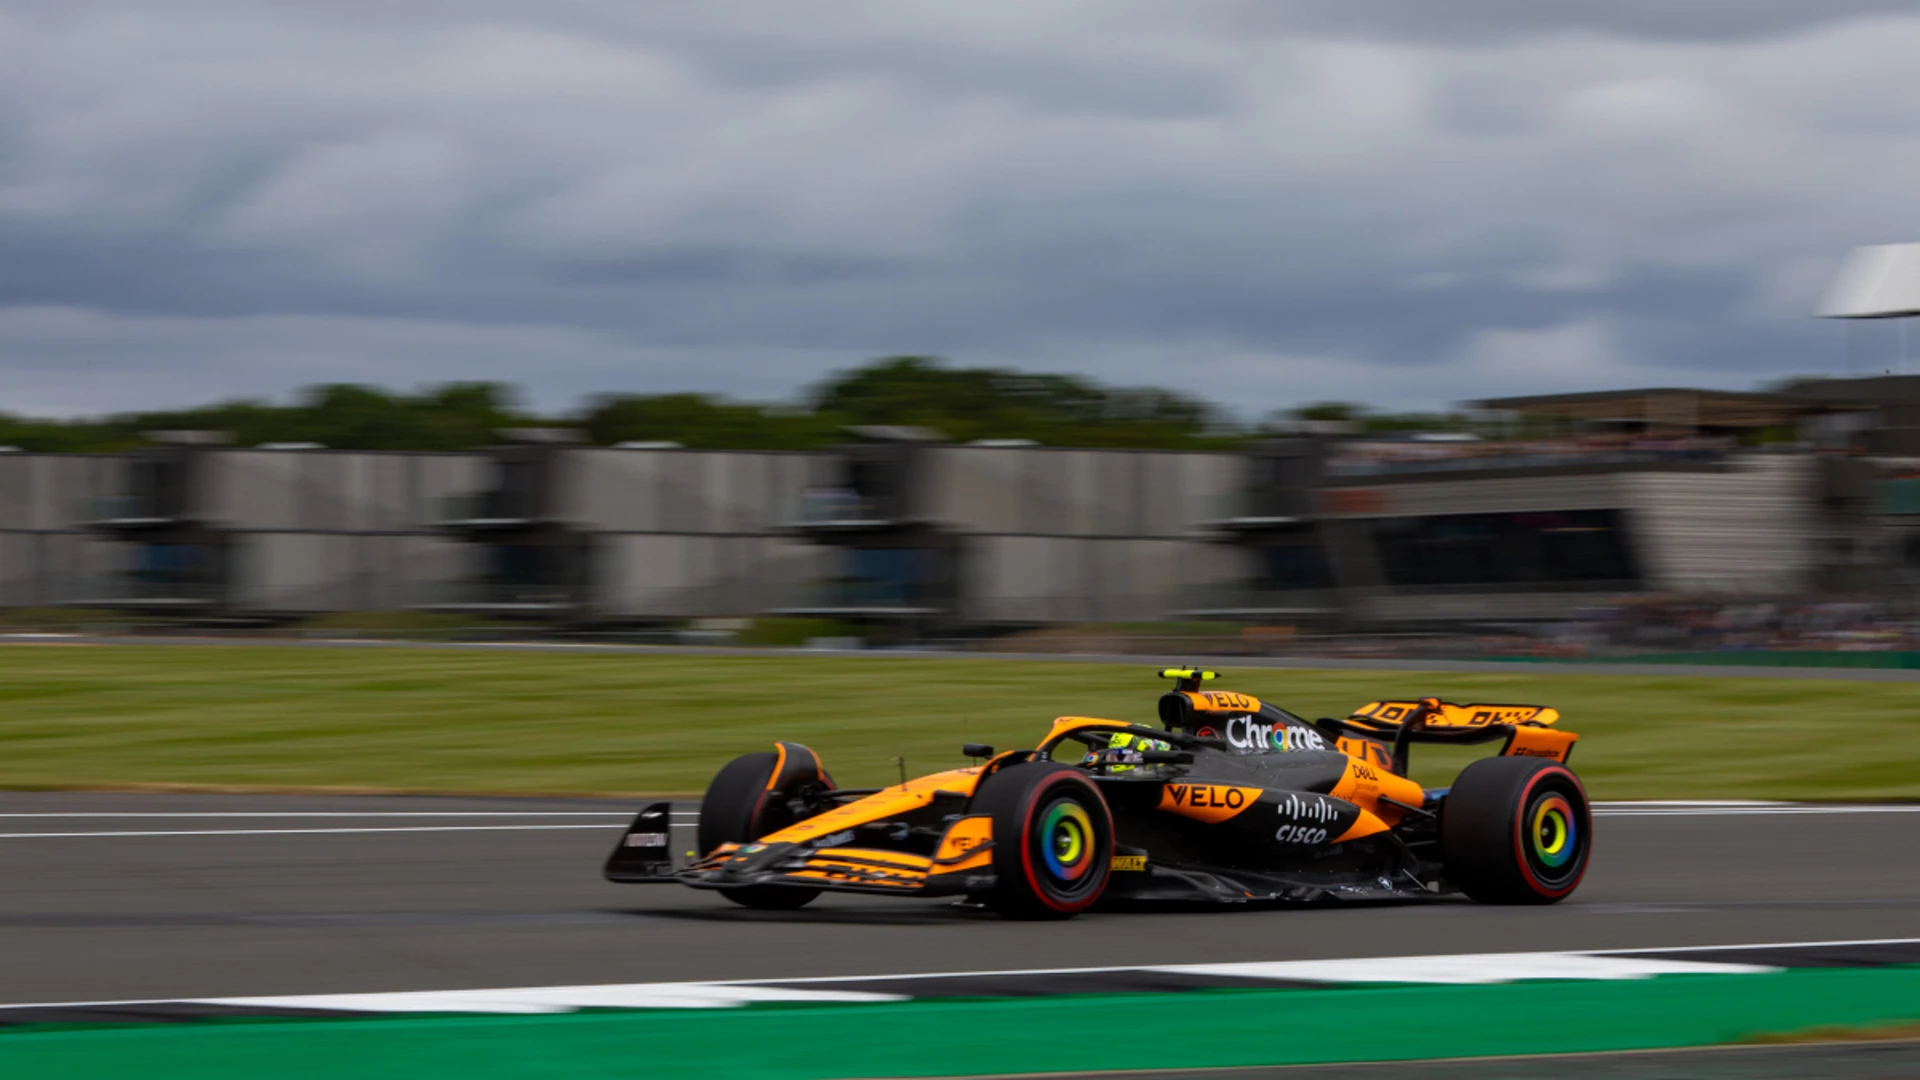 Norris leads mclaren 1-2 as storm clouds loom at Silverstone